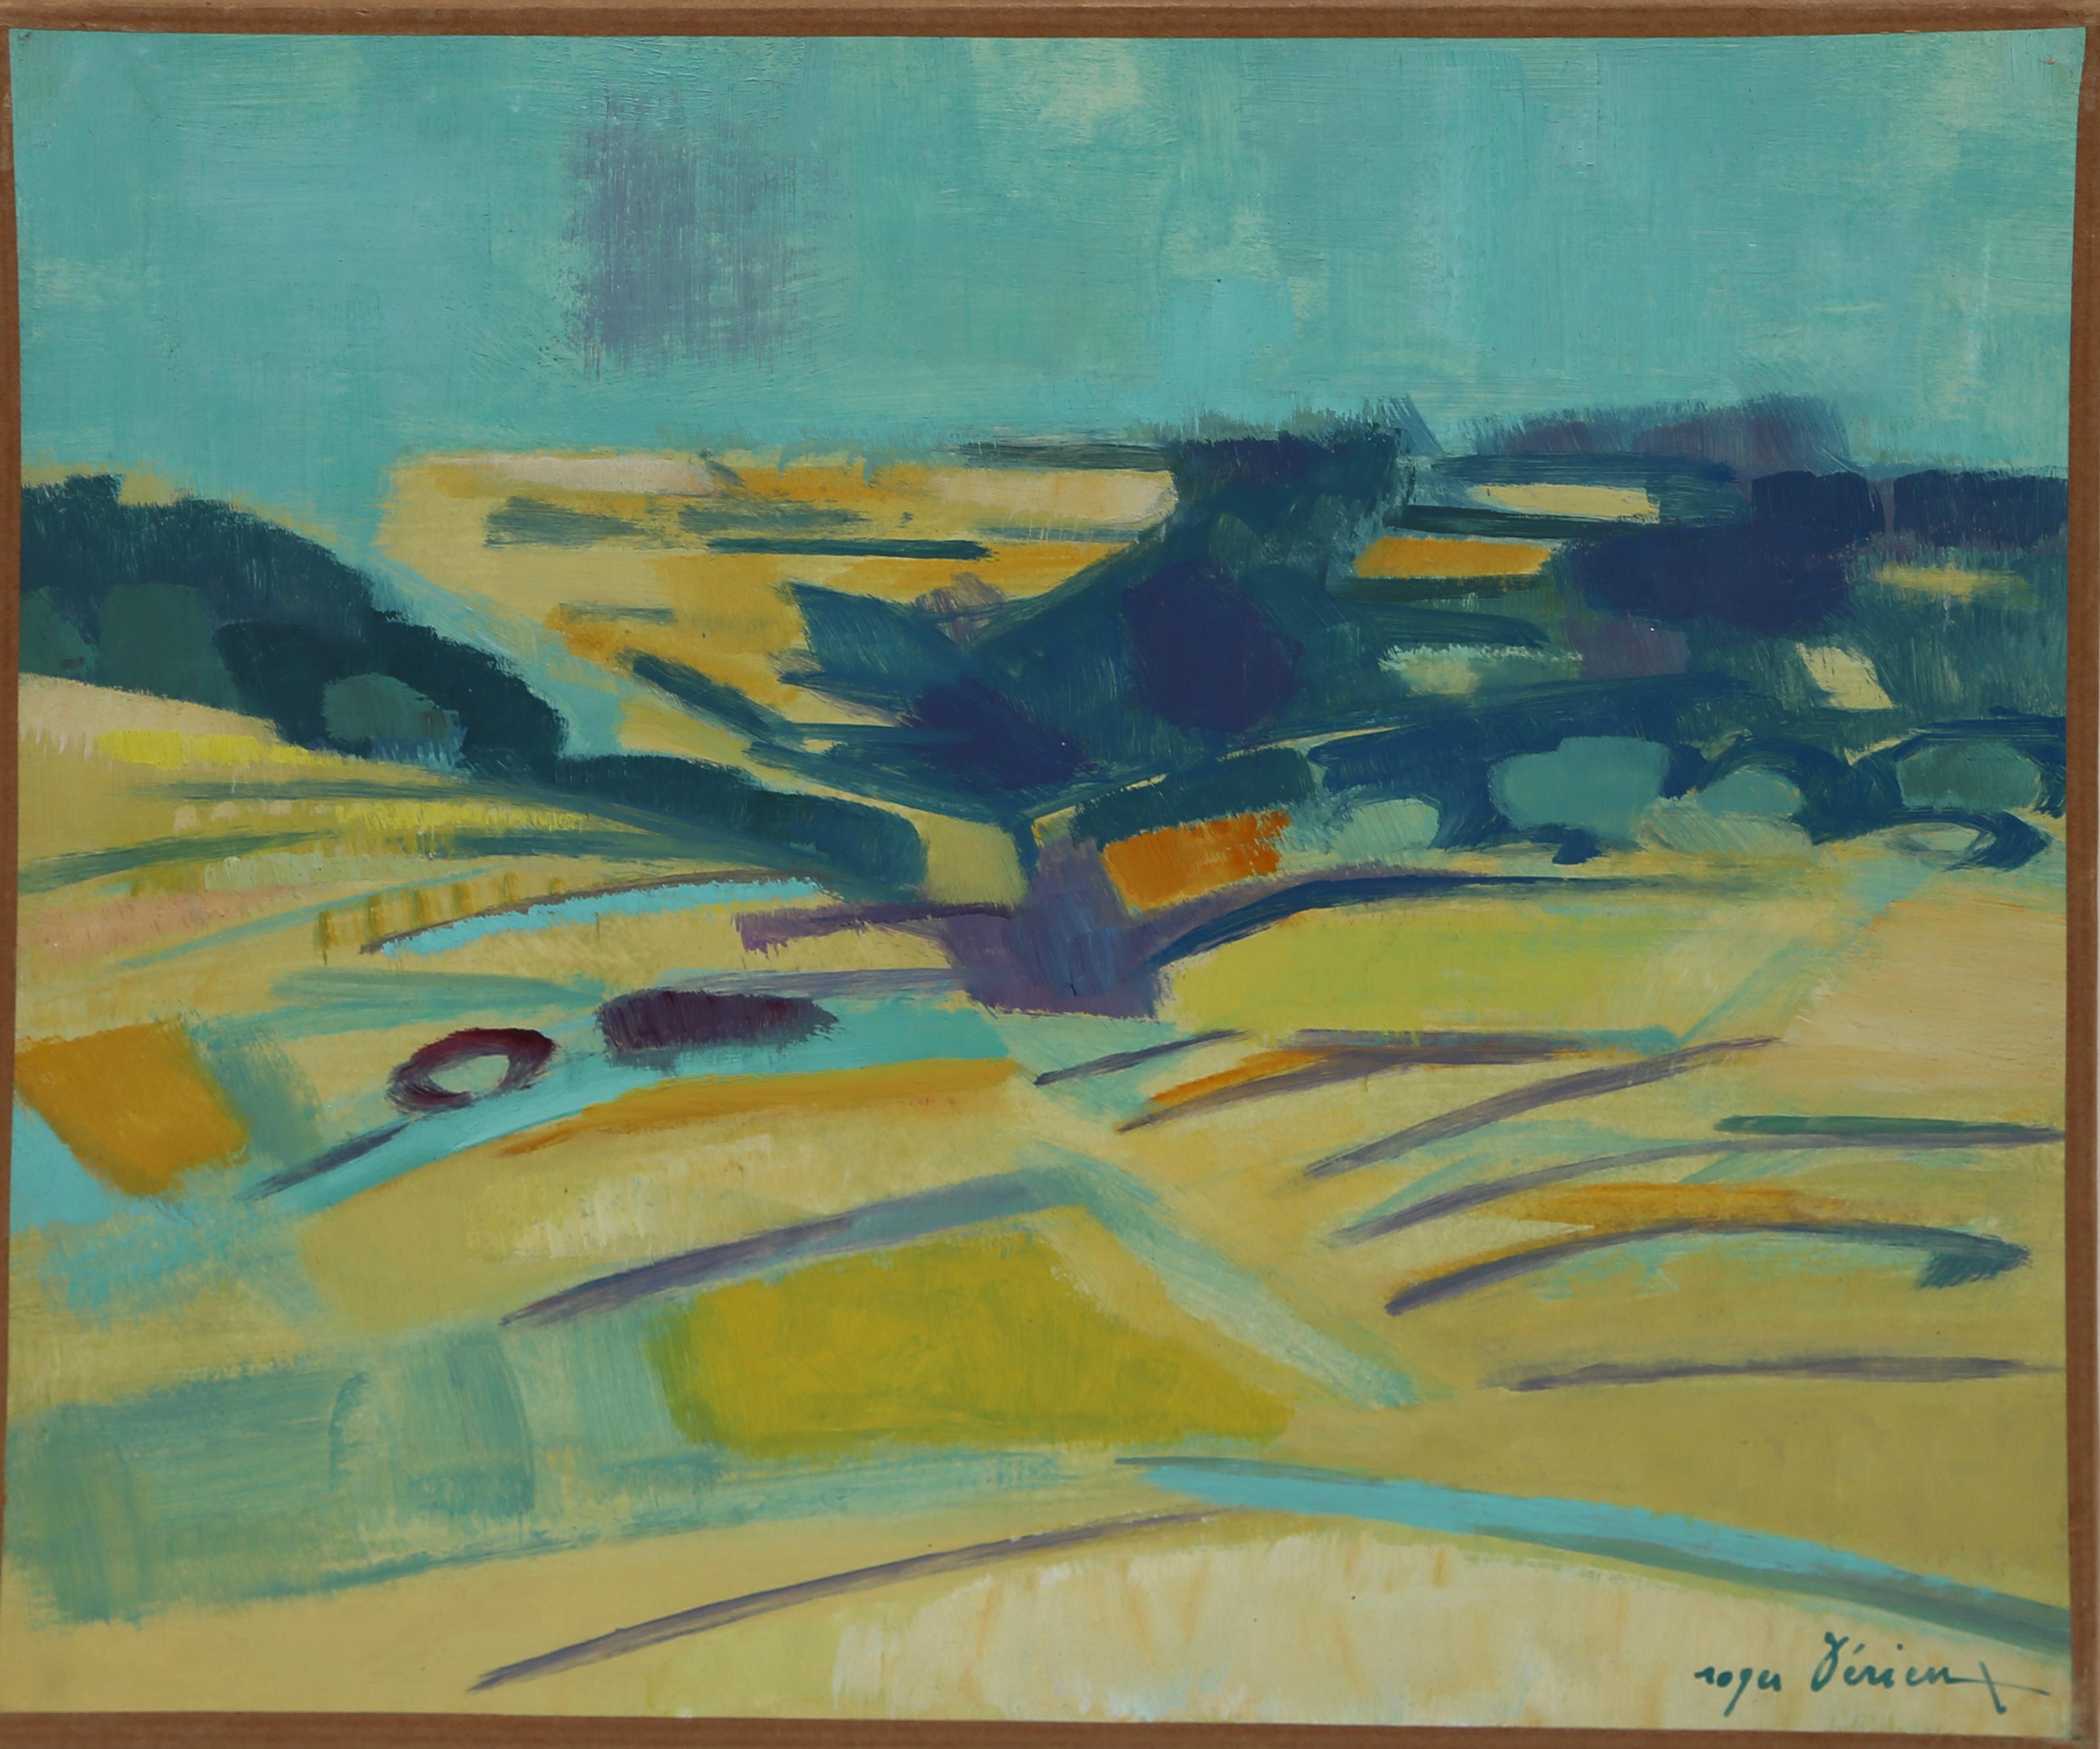 Abstracted French Landscape by Roger Derieux c1955